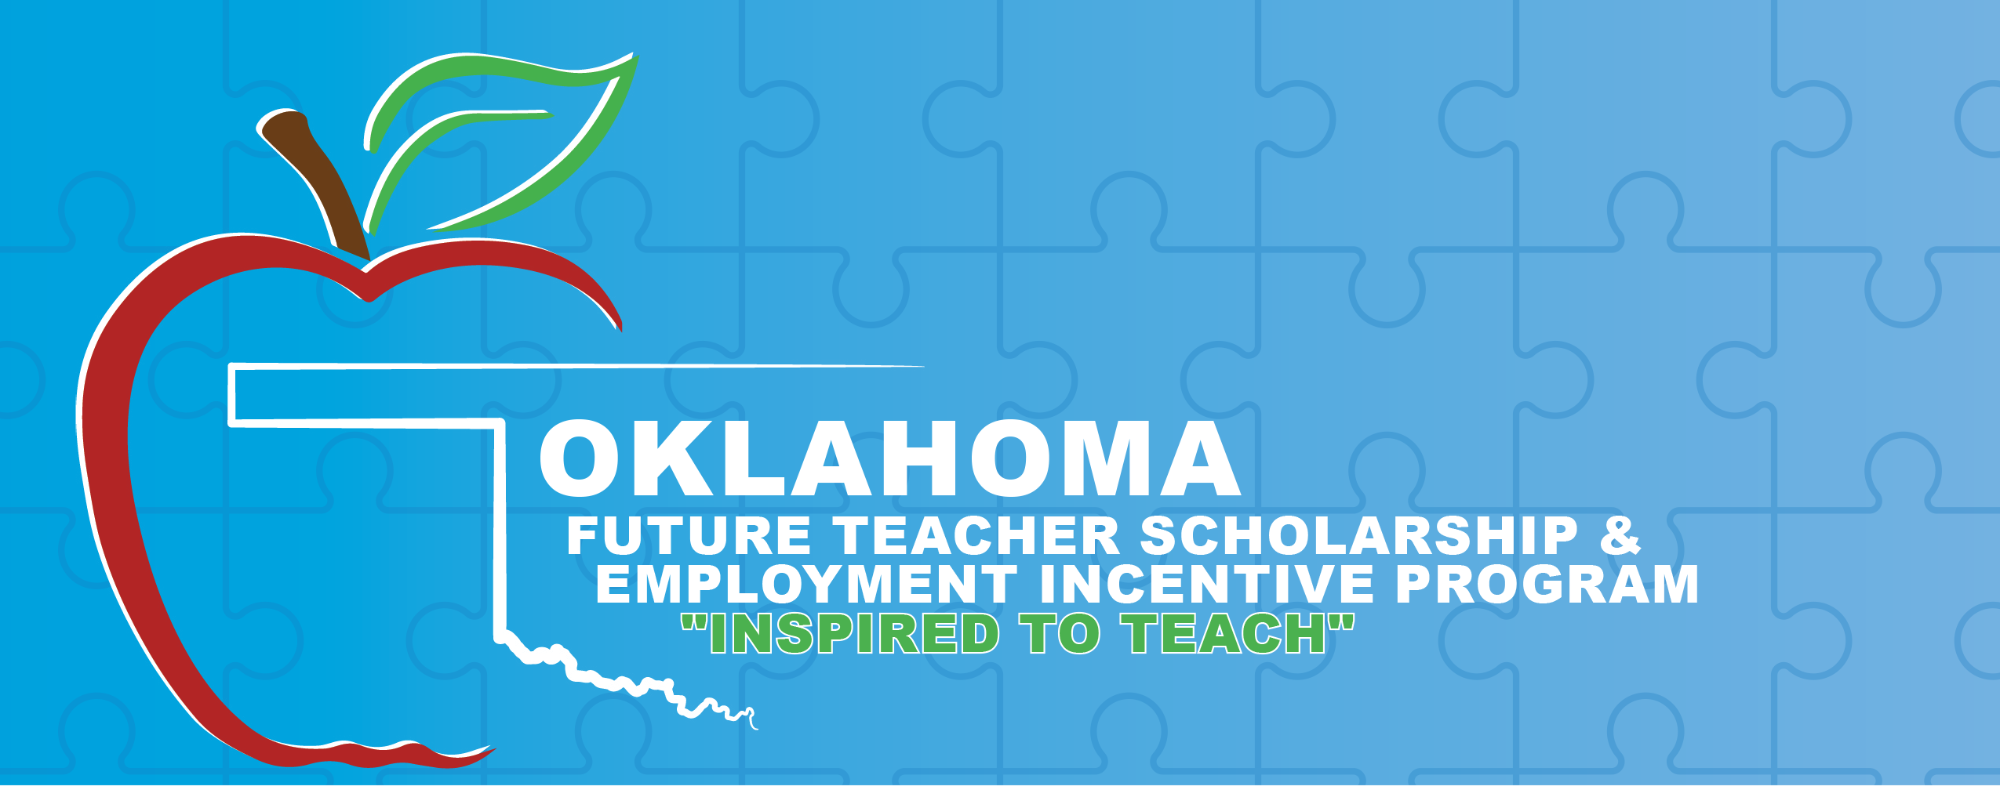 blue rectangle with red outline of an apple and the words "Oklahoma Future Teachers Scholarship & Employment Incentive Program"